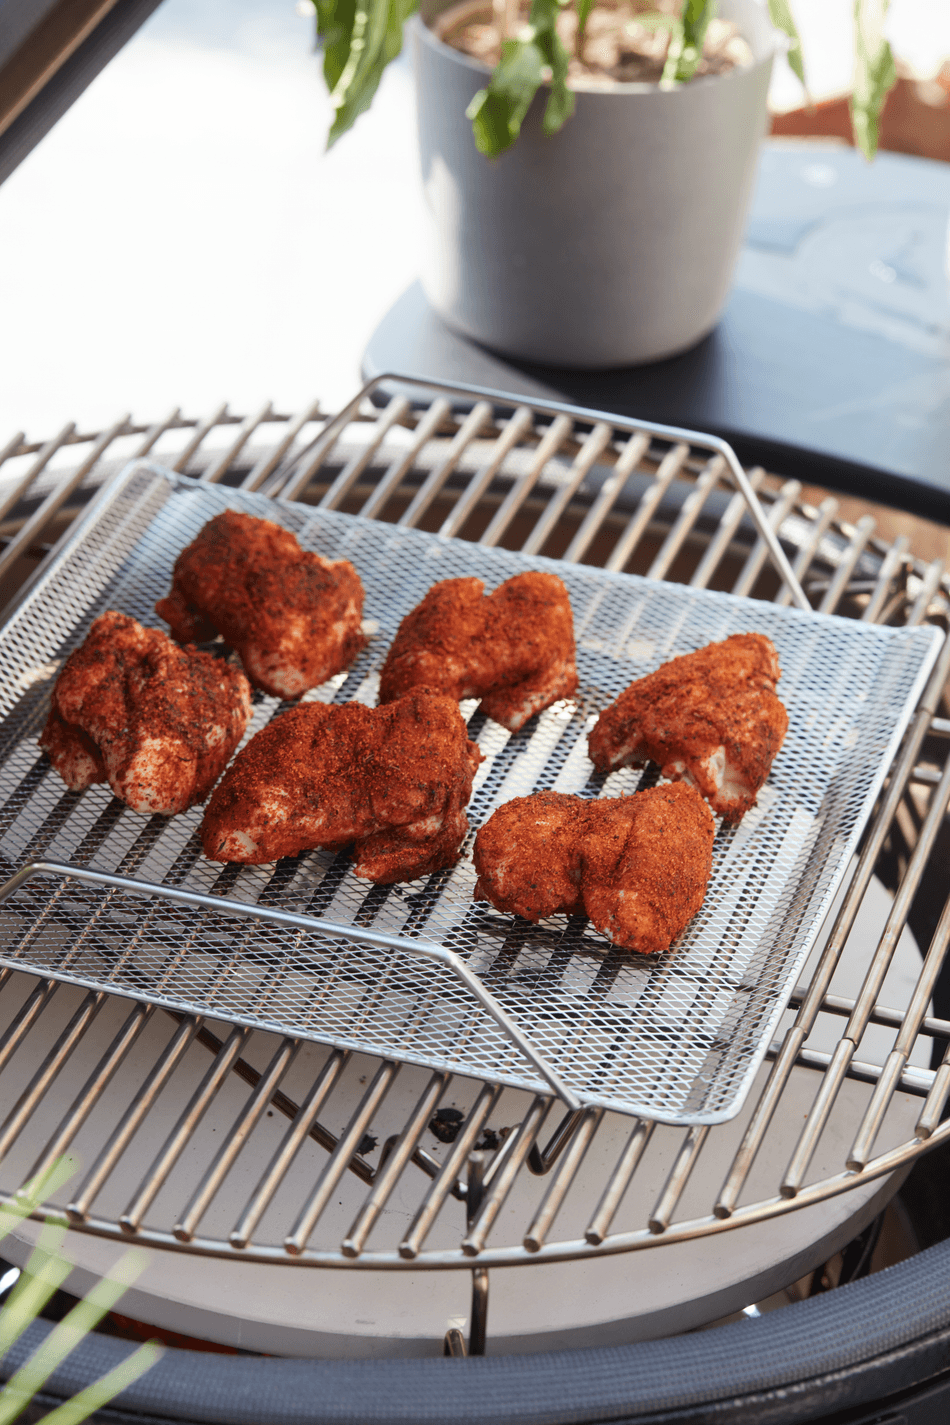 Stainless steel grill topper